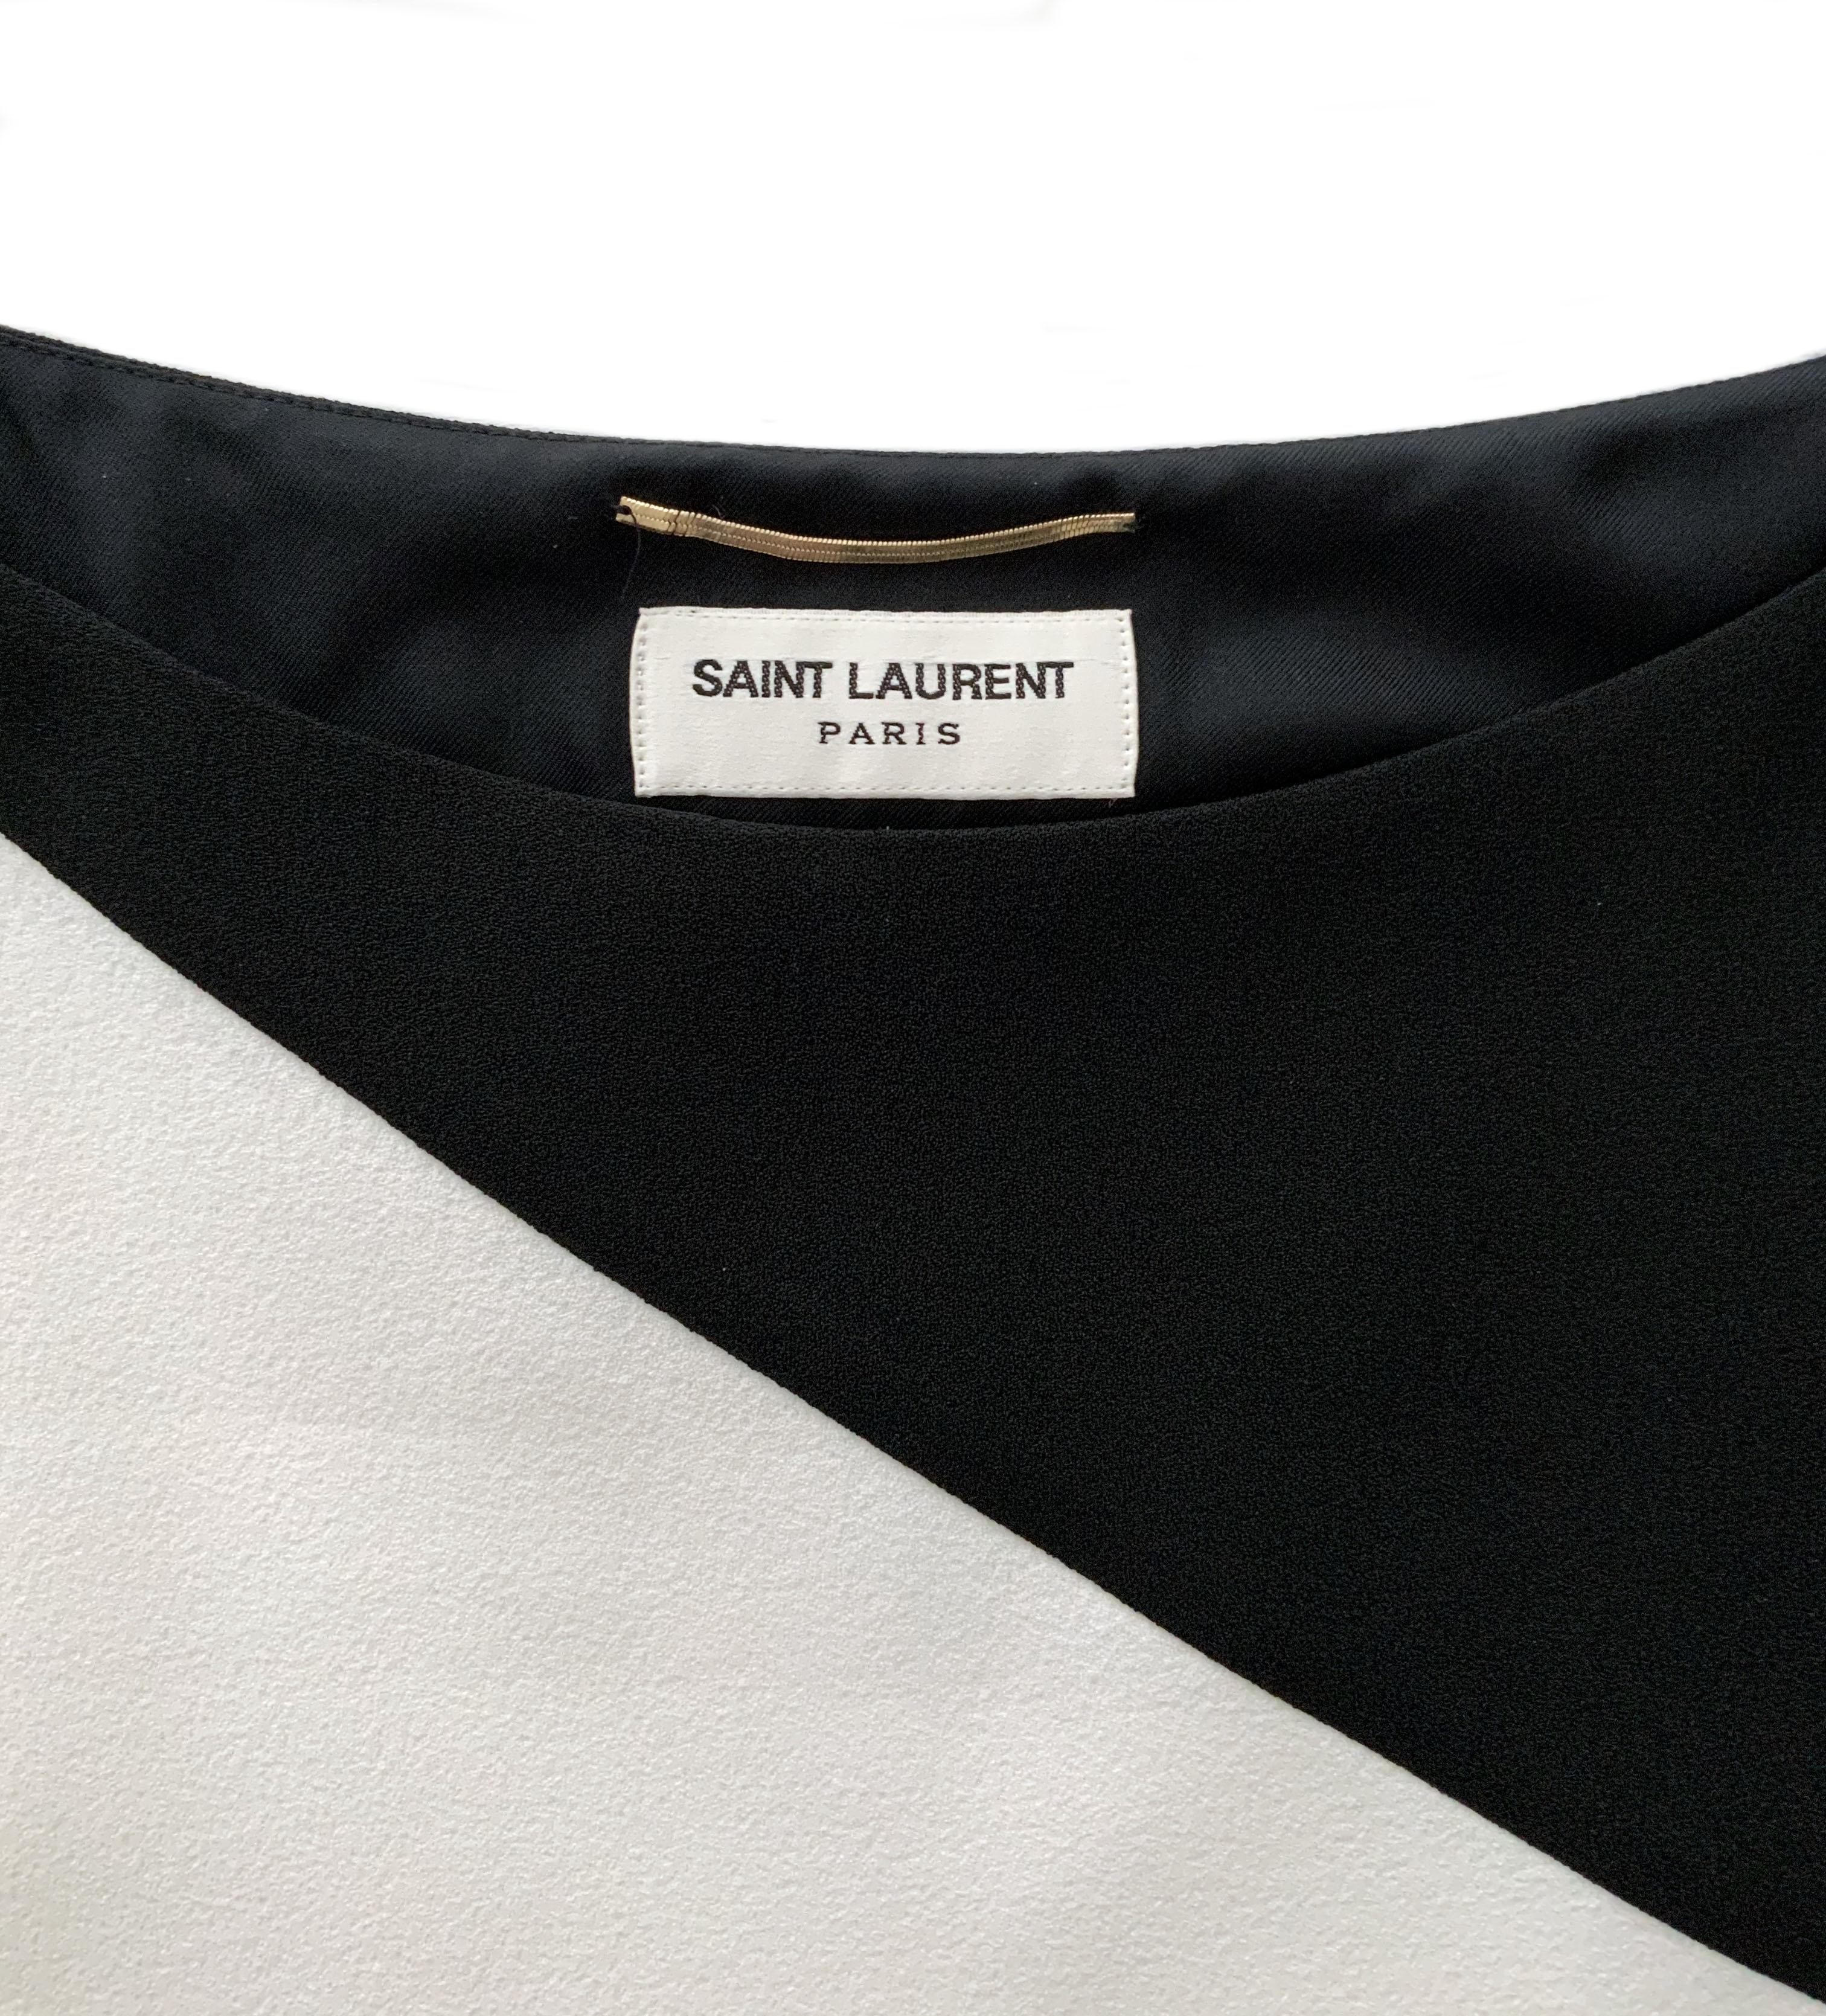 This pretty sharp looking dress from the house of Saint Laurent is an easy dress to wear for the summer or for an evening.
it is characterized by a soft white and black fabric assymetrically assembled.

Fabric: 57% acetate, 43% rayon
Lining: 100%